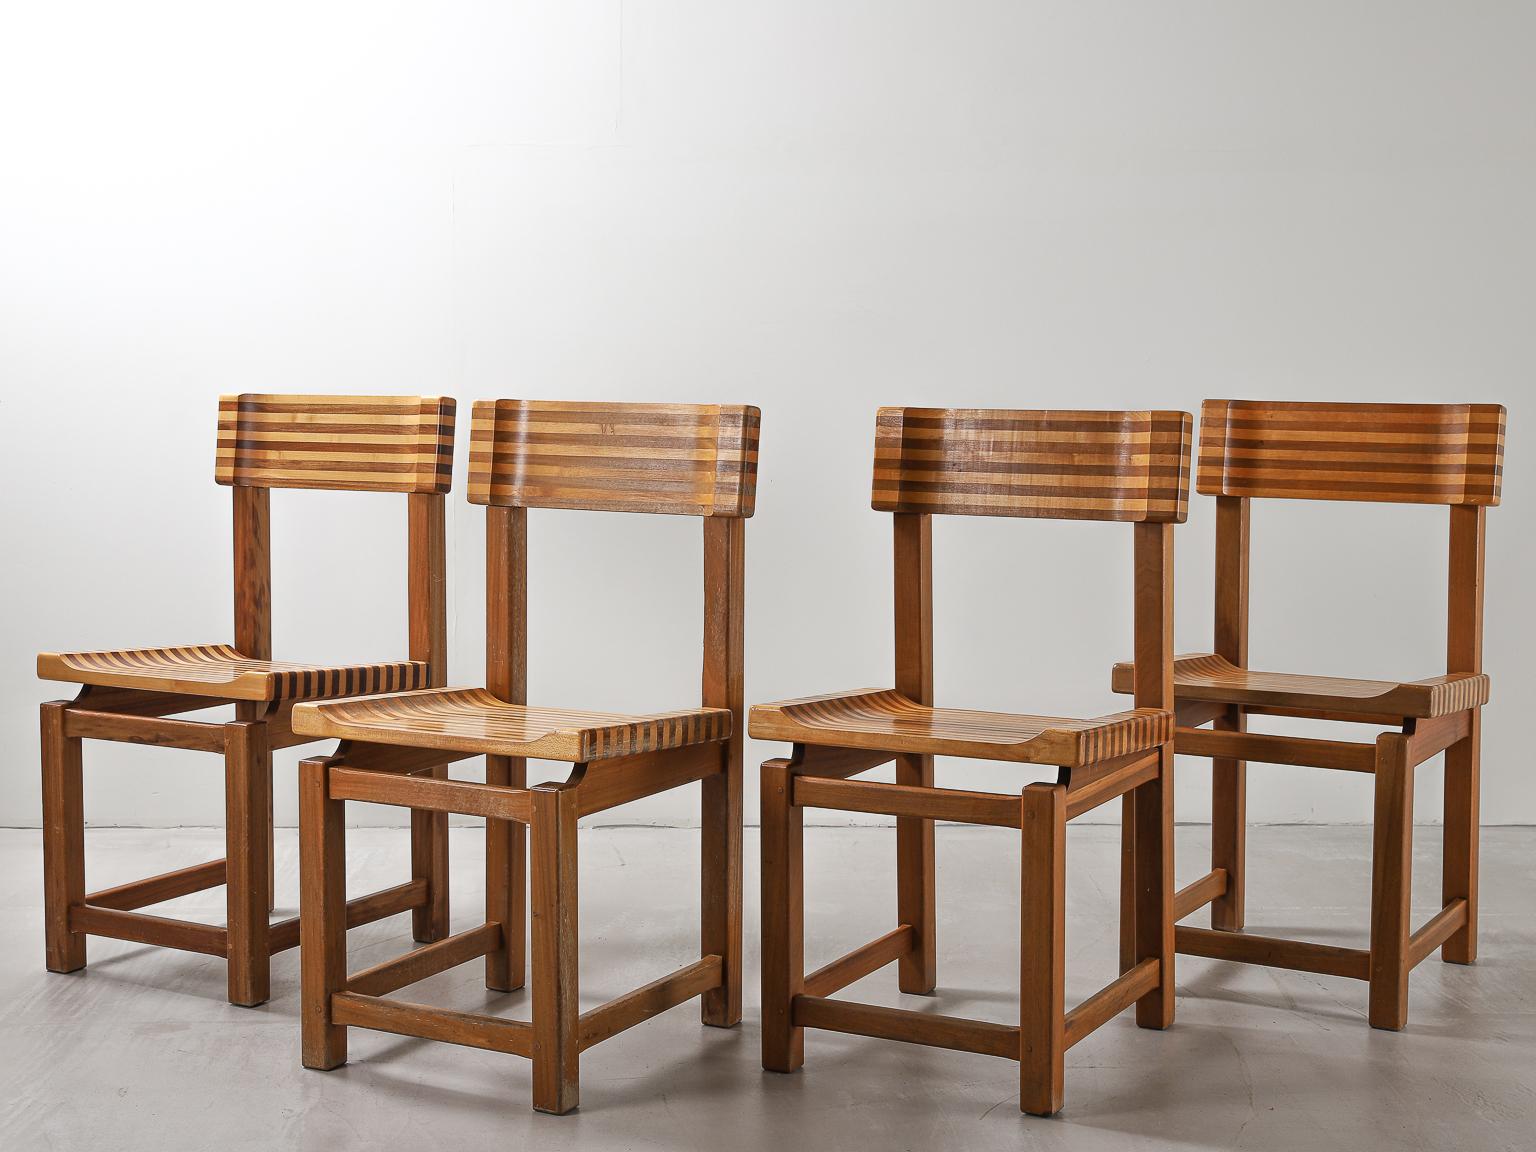 A set of four side or dining chairs, circa mid-20th century, constructed with mid and light toned woods used together to create a striped effect on the seat and backrest in a style reminiscent of the Brazilian artist and furniture designer Joaquim